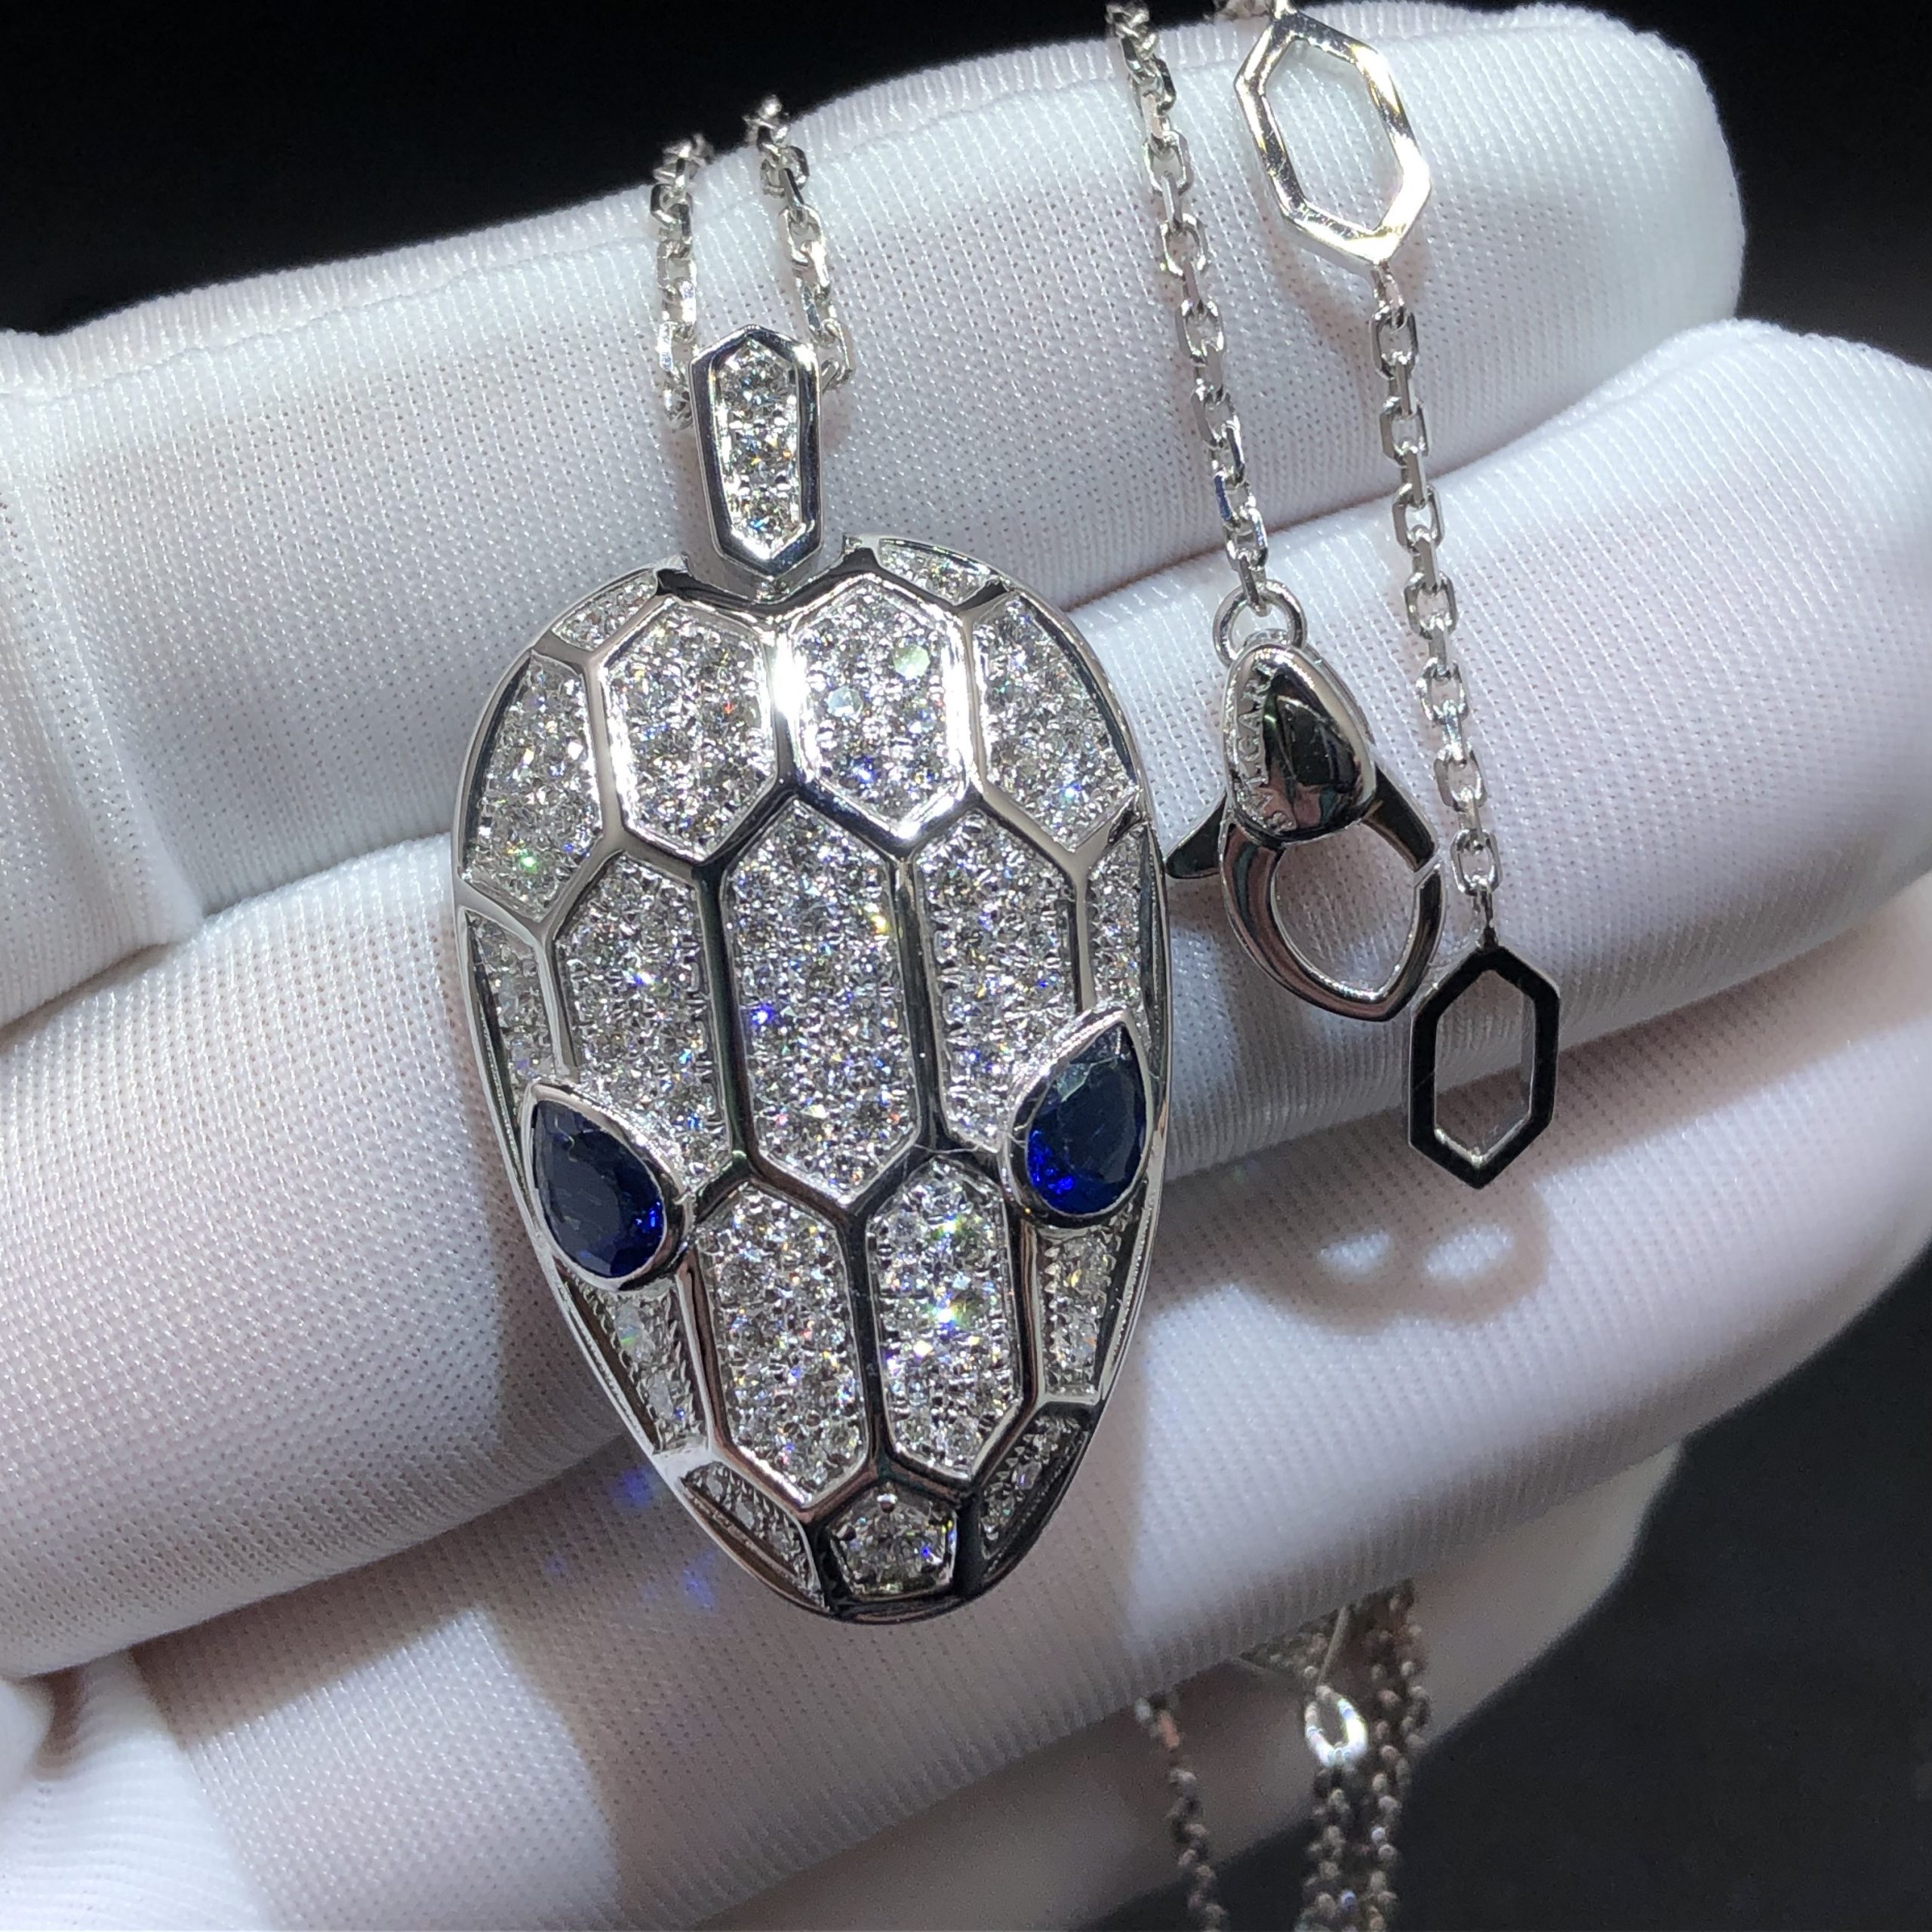 Bvlgari Serpenti Necklace Custom Made in 18K White Gold with Blue Sapphires and Diamond-paved